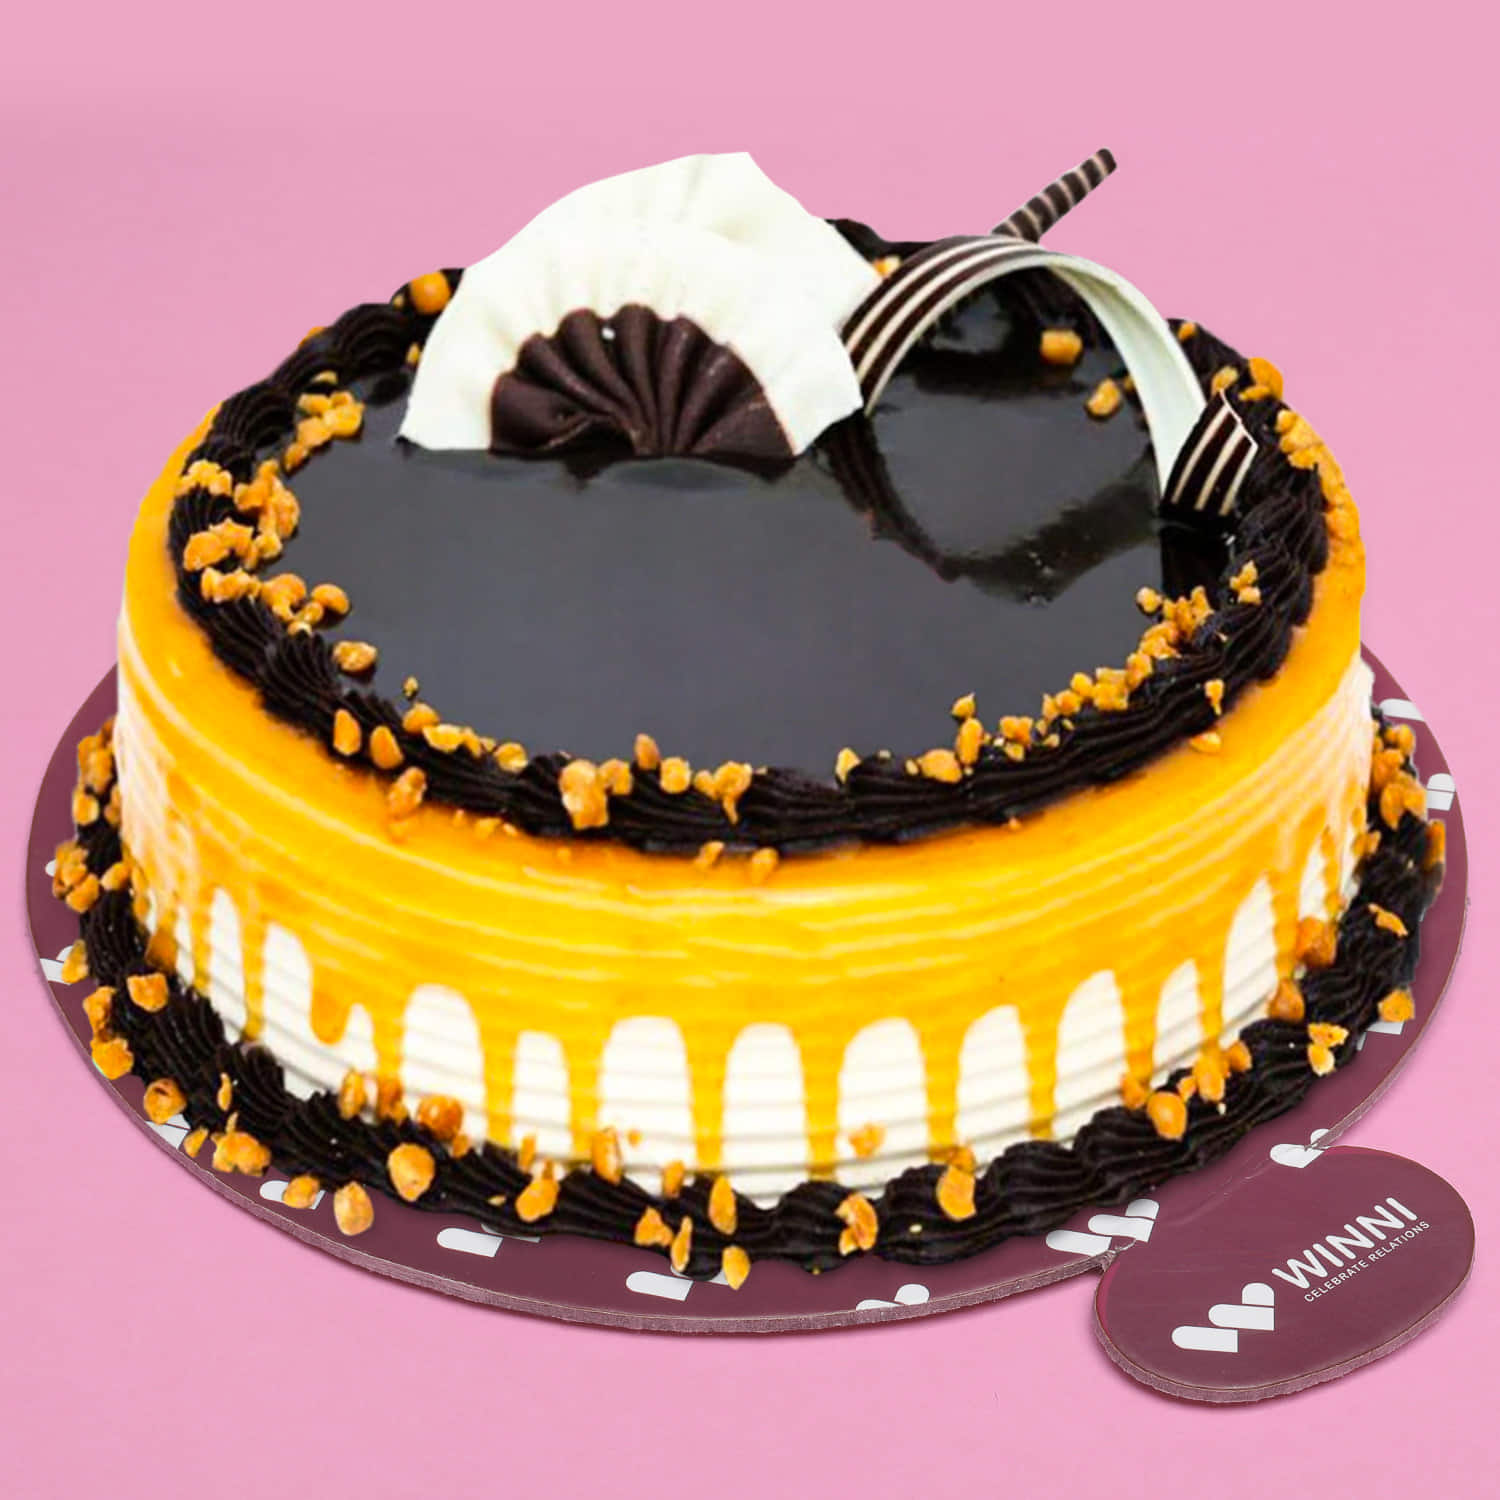 Get Happy Anniversary Cakes Online| Order From Presto